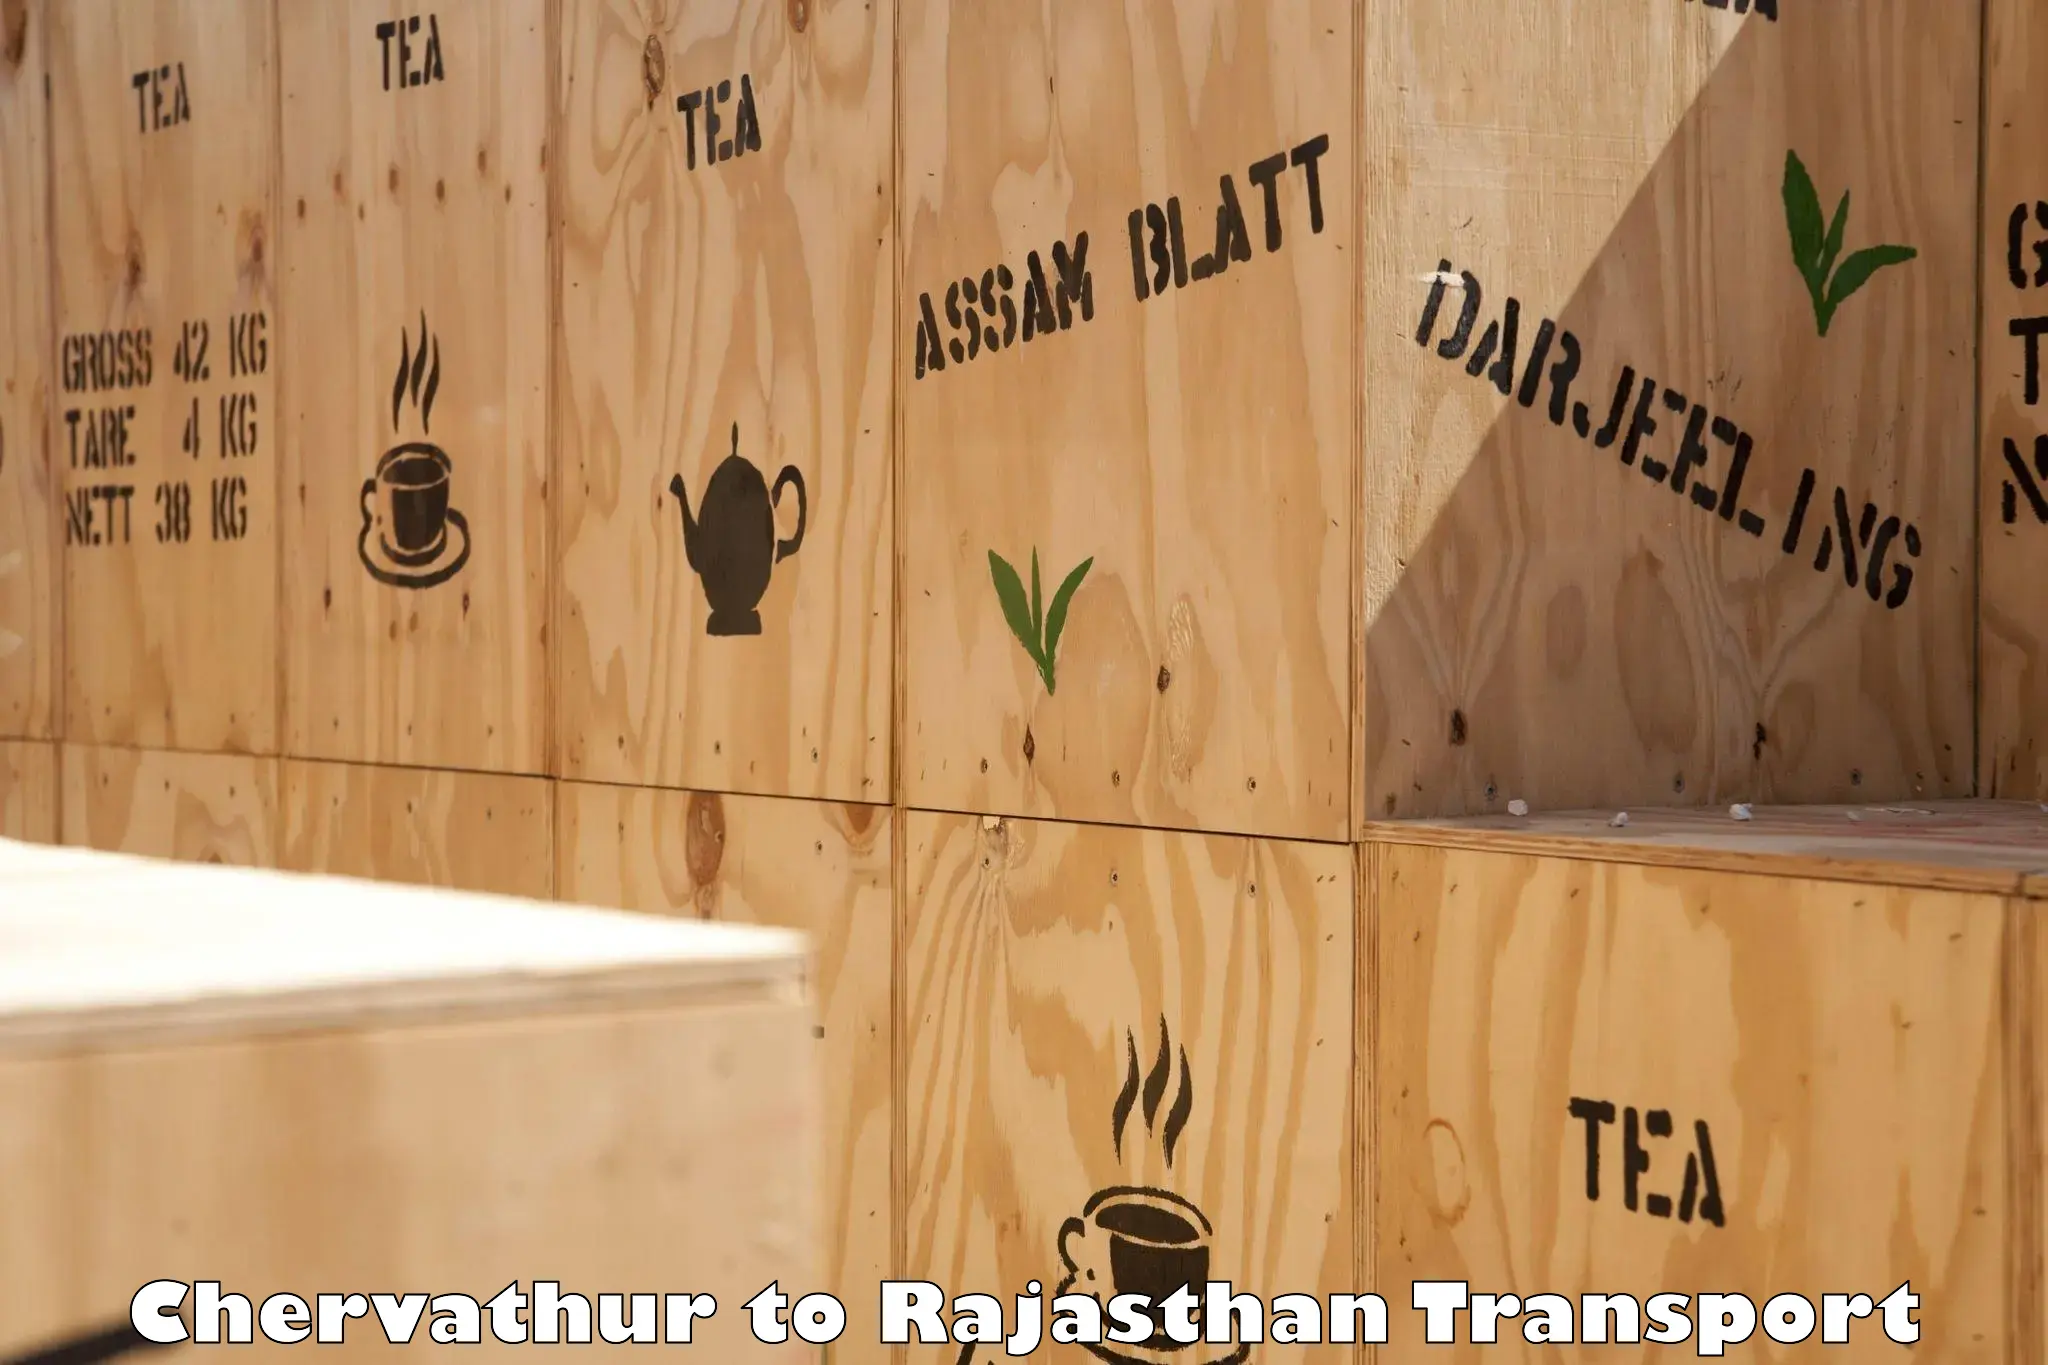 Transport in sharing Chervathur to Rajasthan